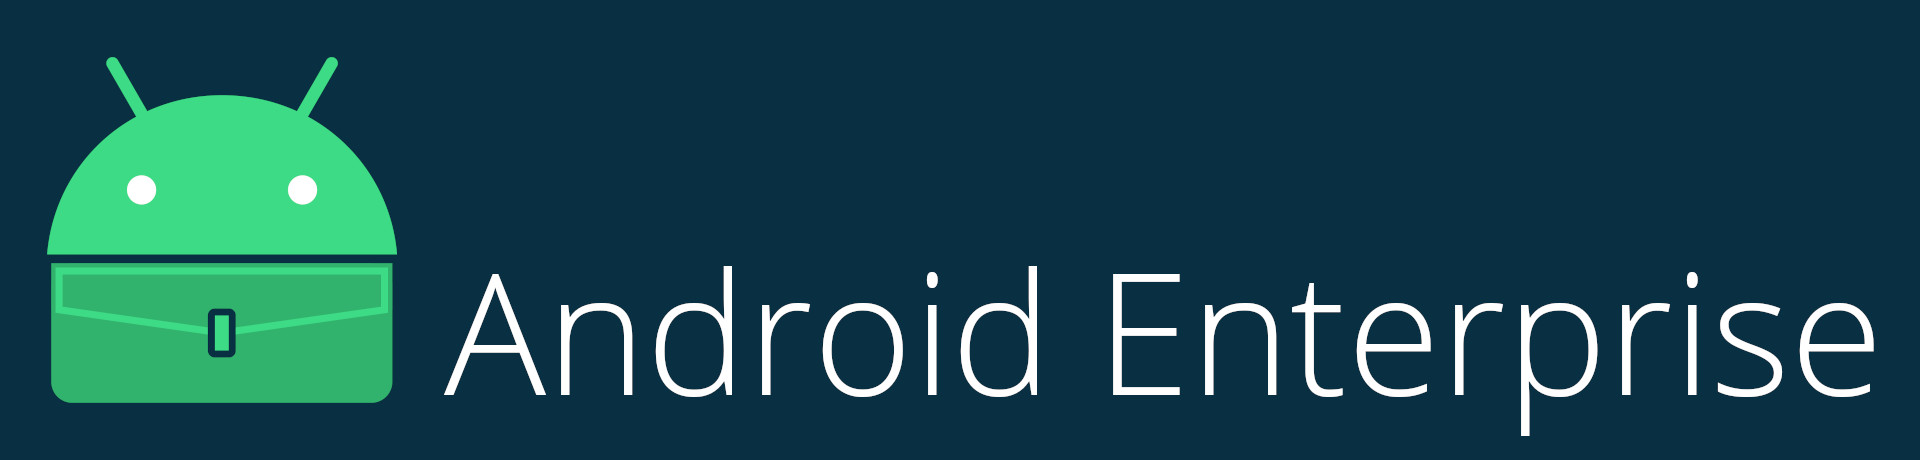 Android Enterprise – Everything you need to know